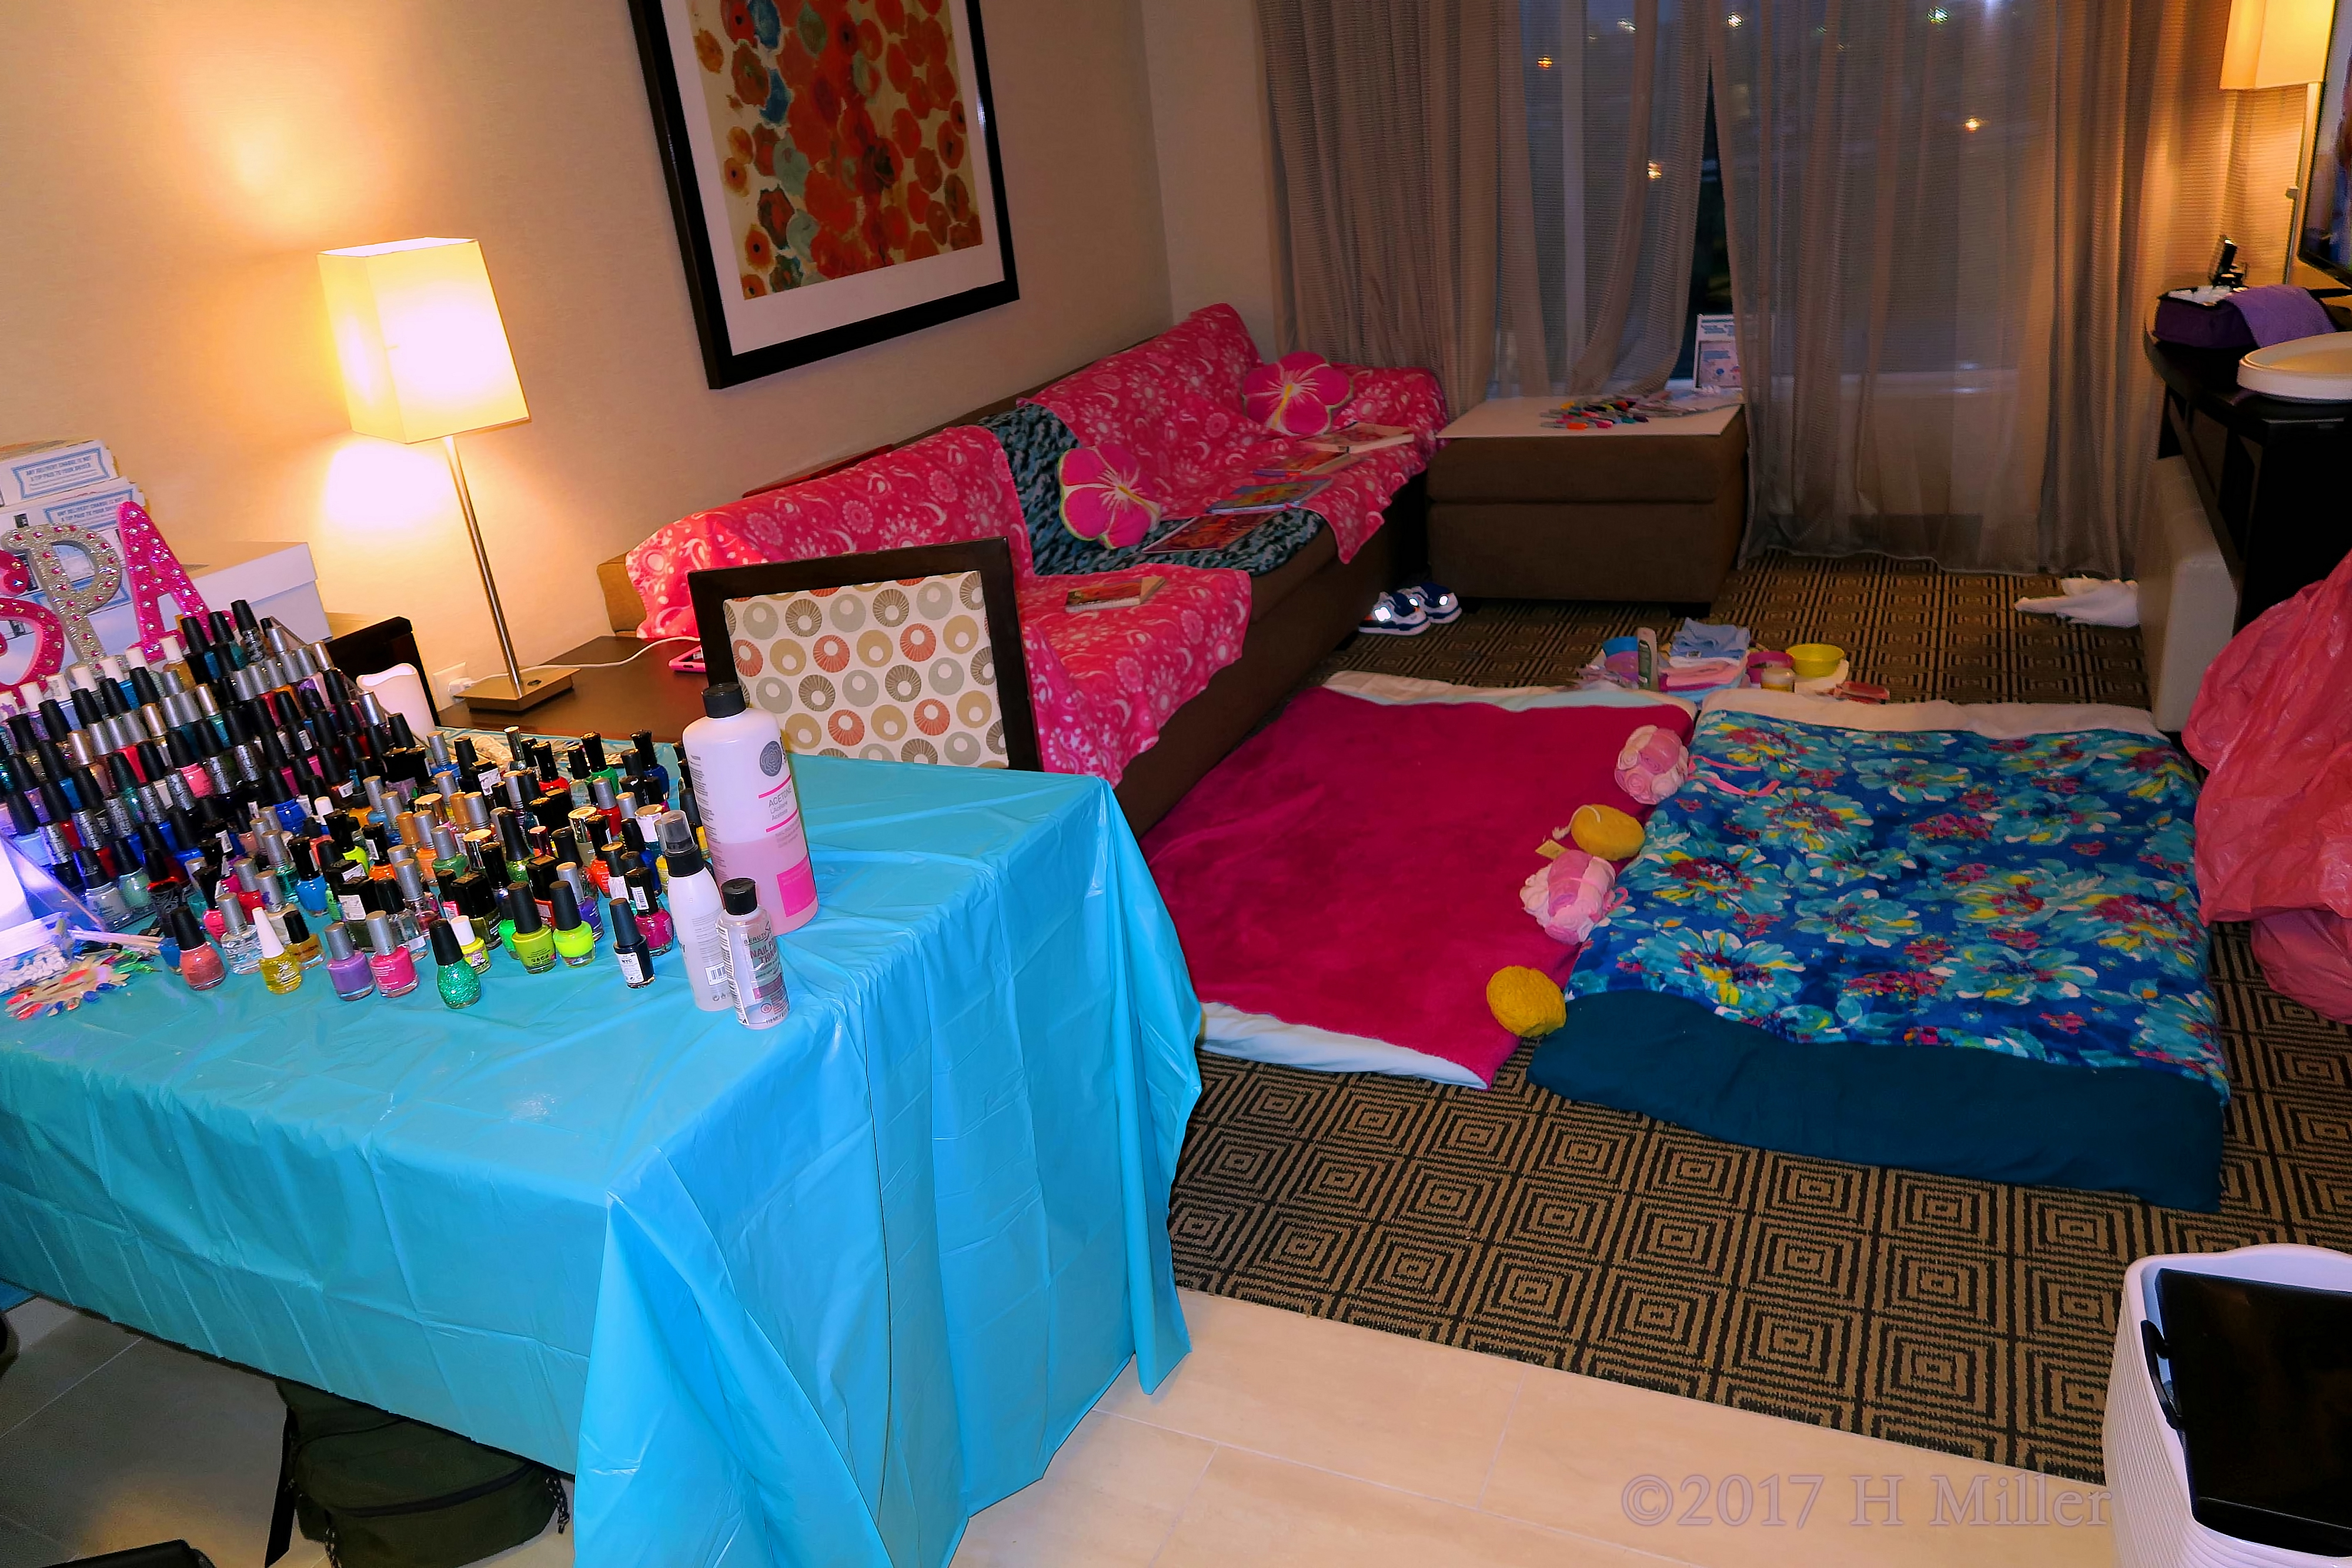 The Girls Spa Is Set Up And Ready For Spa Treatments!